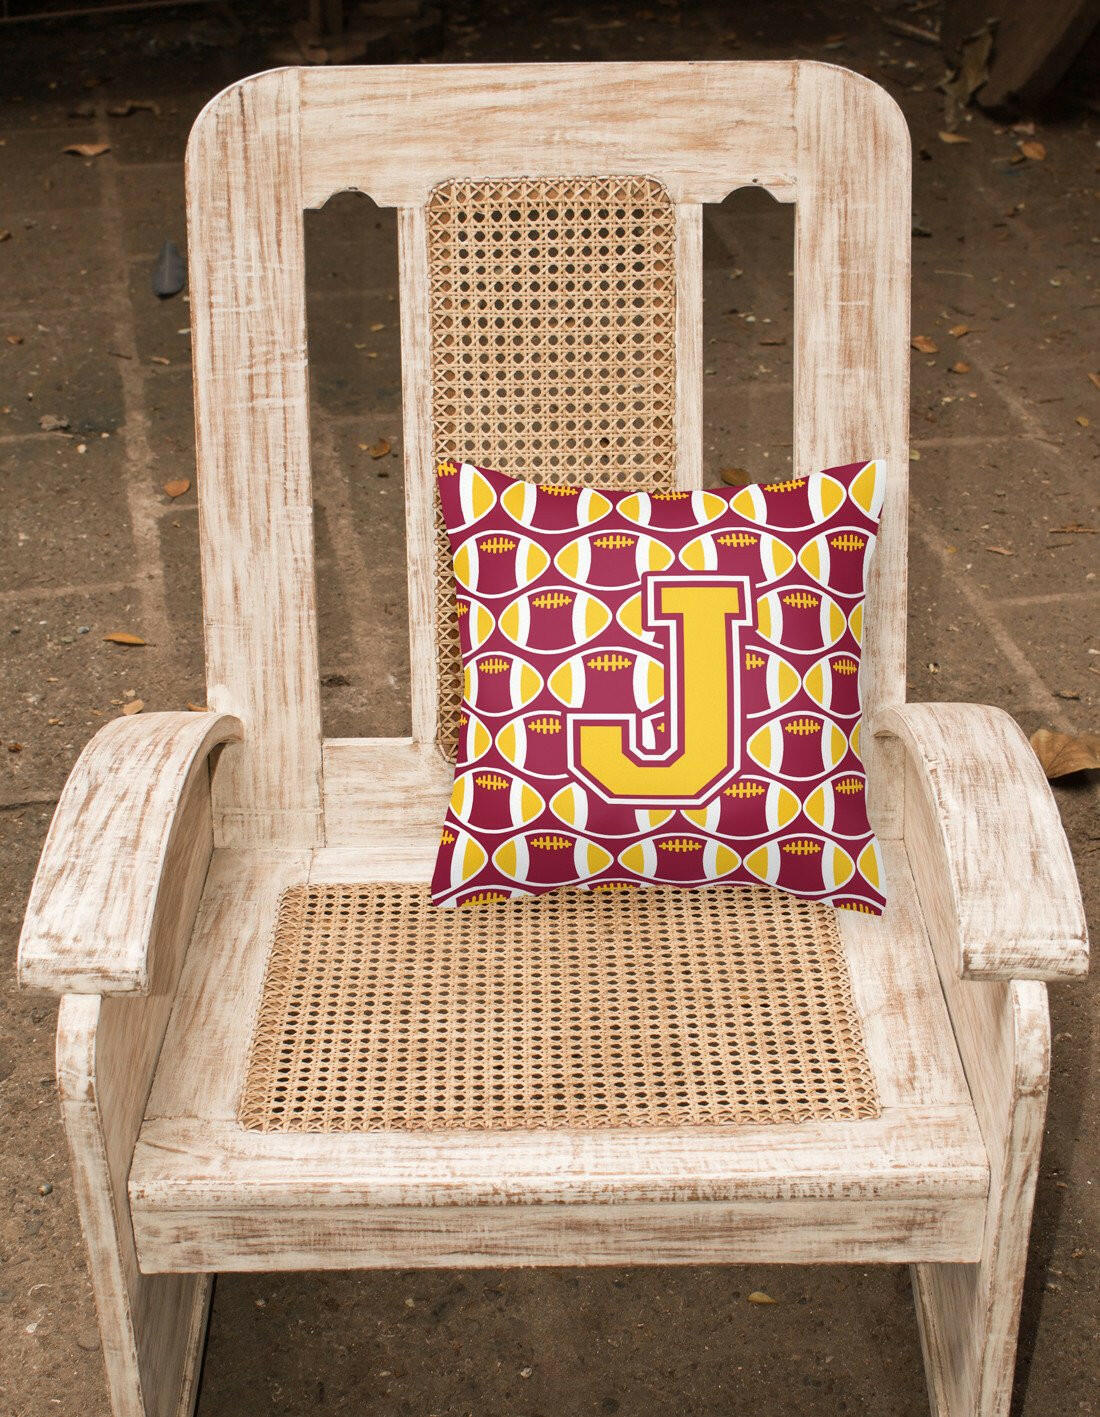 Letter J Football Maroon and Gold Fabric Decorative Pillow CJ1081-JPW1414 by Caroline's Treasures